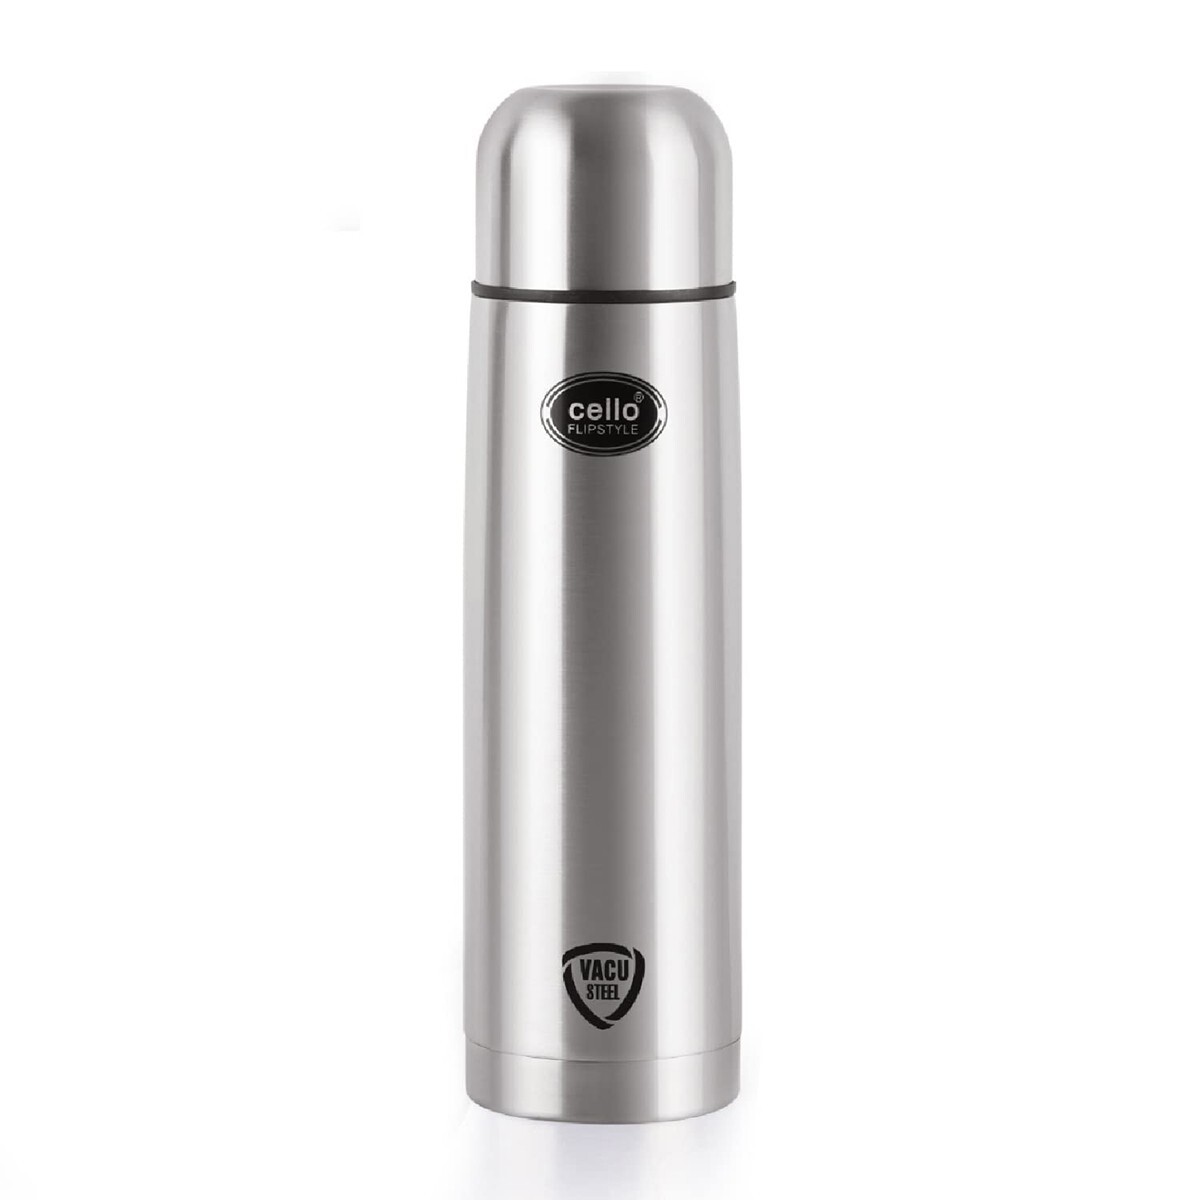 Cello Stainless steel Flask Flipstyle 1000ml